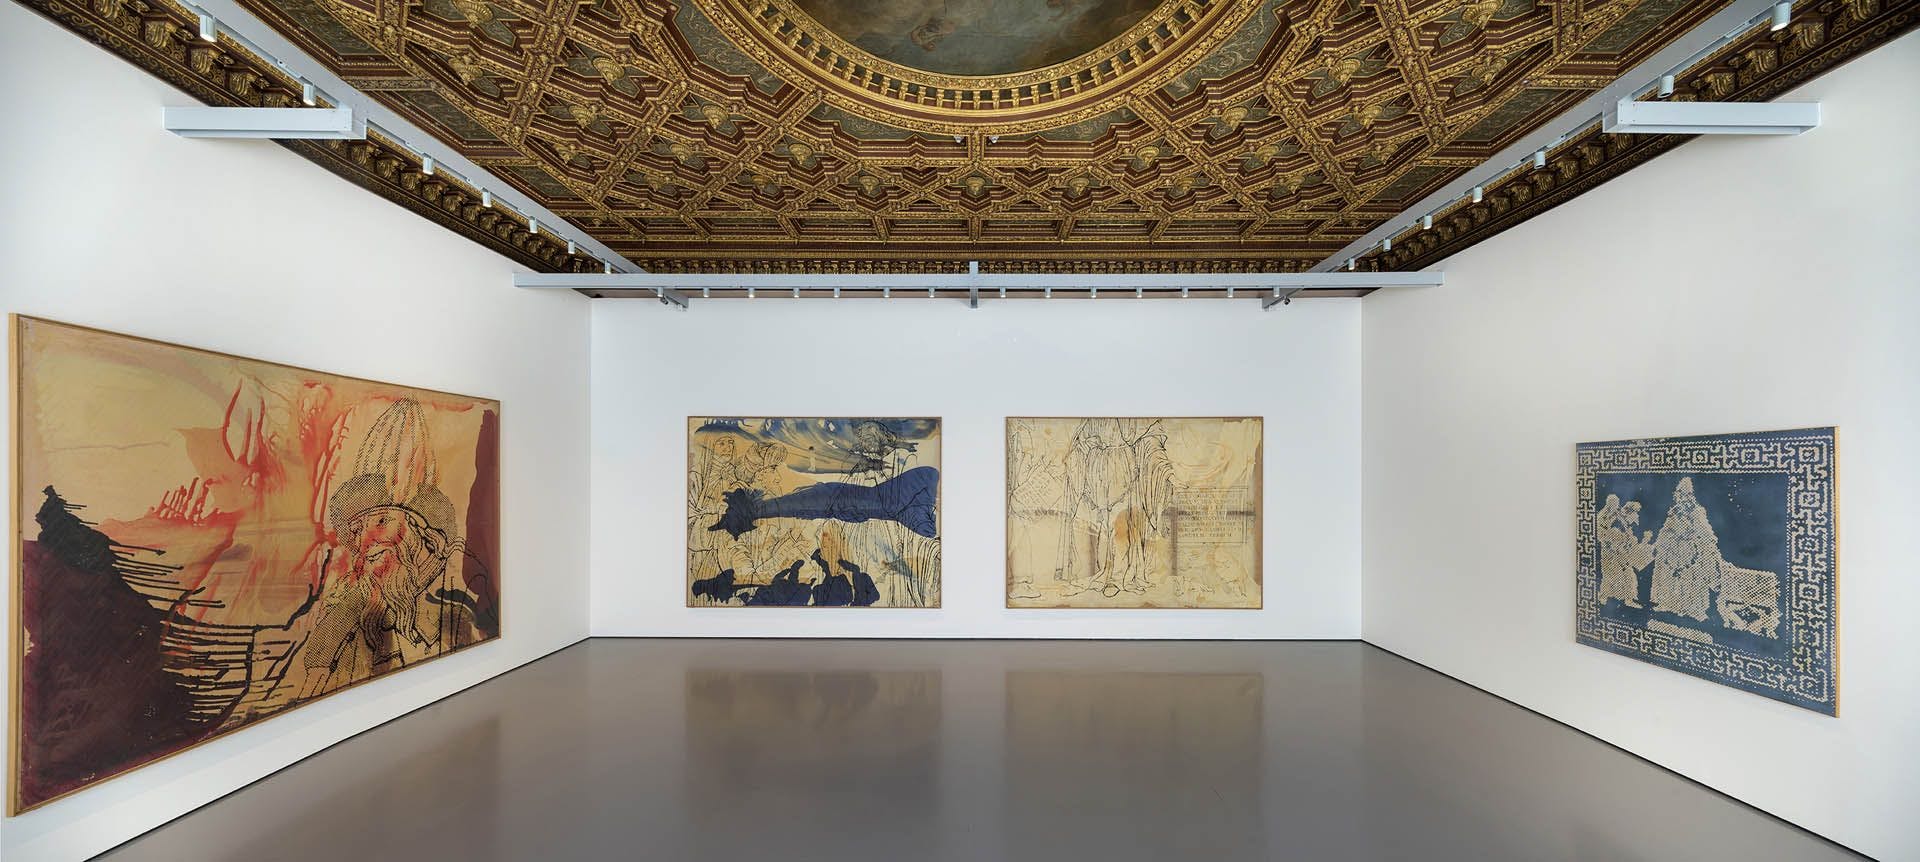 Installation view of the exhibition Sigmar Polke at Palazzo Grassi in Venice, dated 2016.